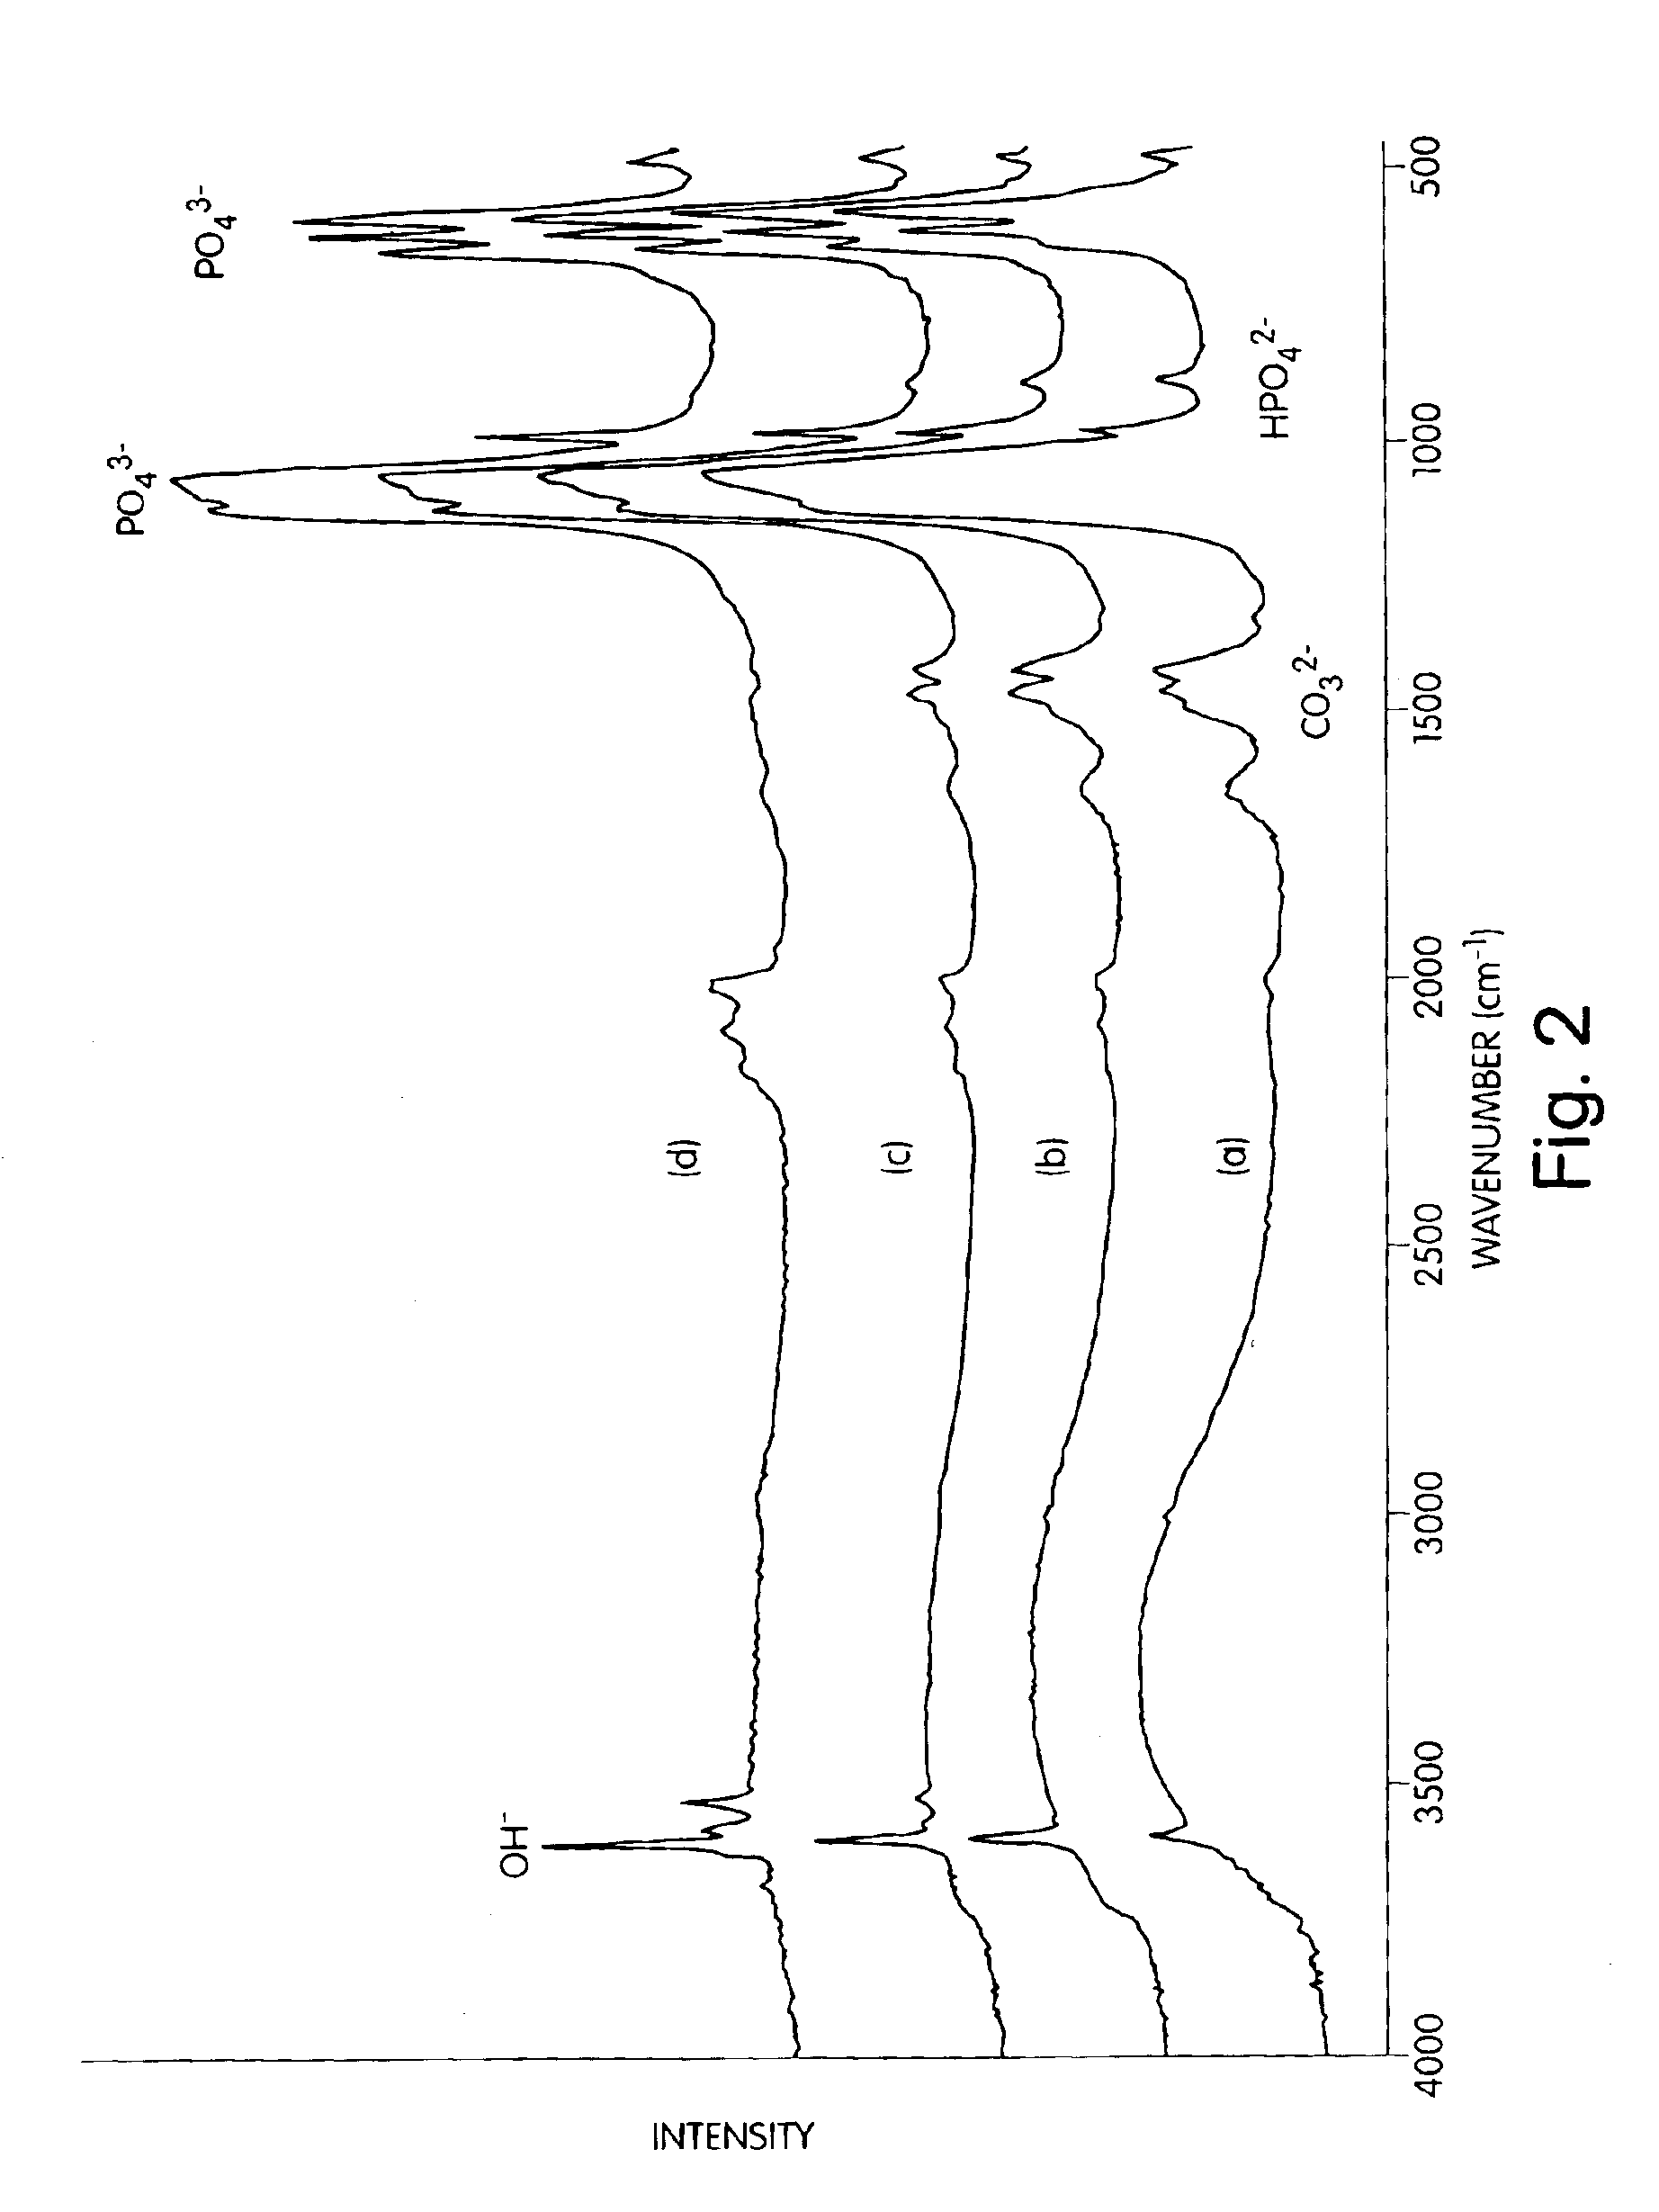 Nanocrystalline apatites and composites, prostheses incorporating them, and method for their production